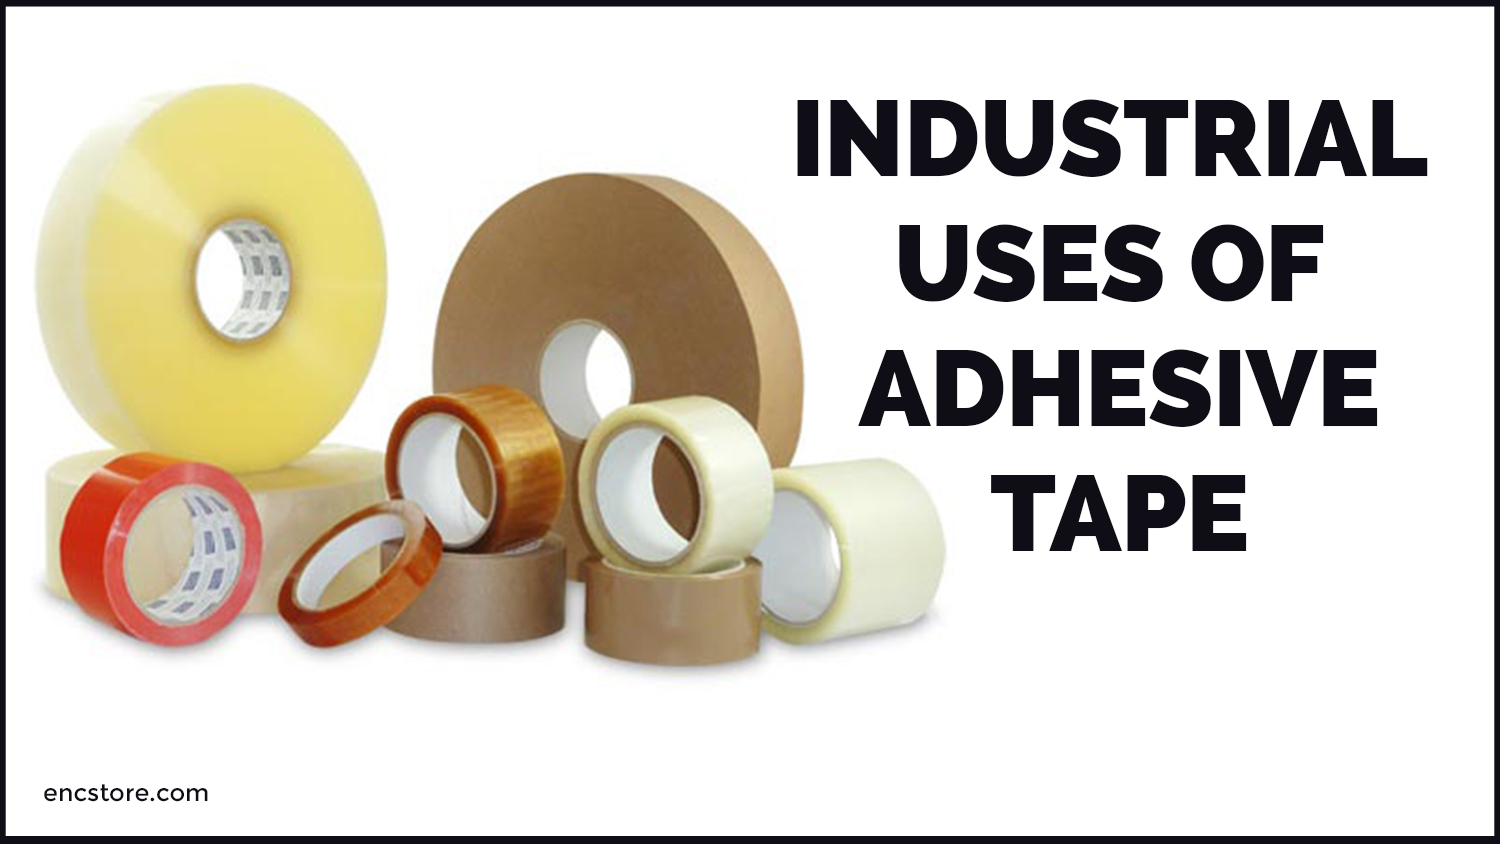 Industrial Uses of Adhesive Tape